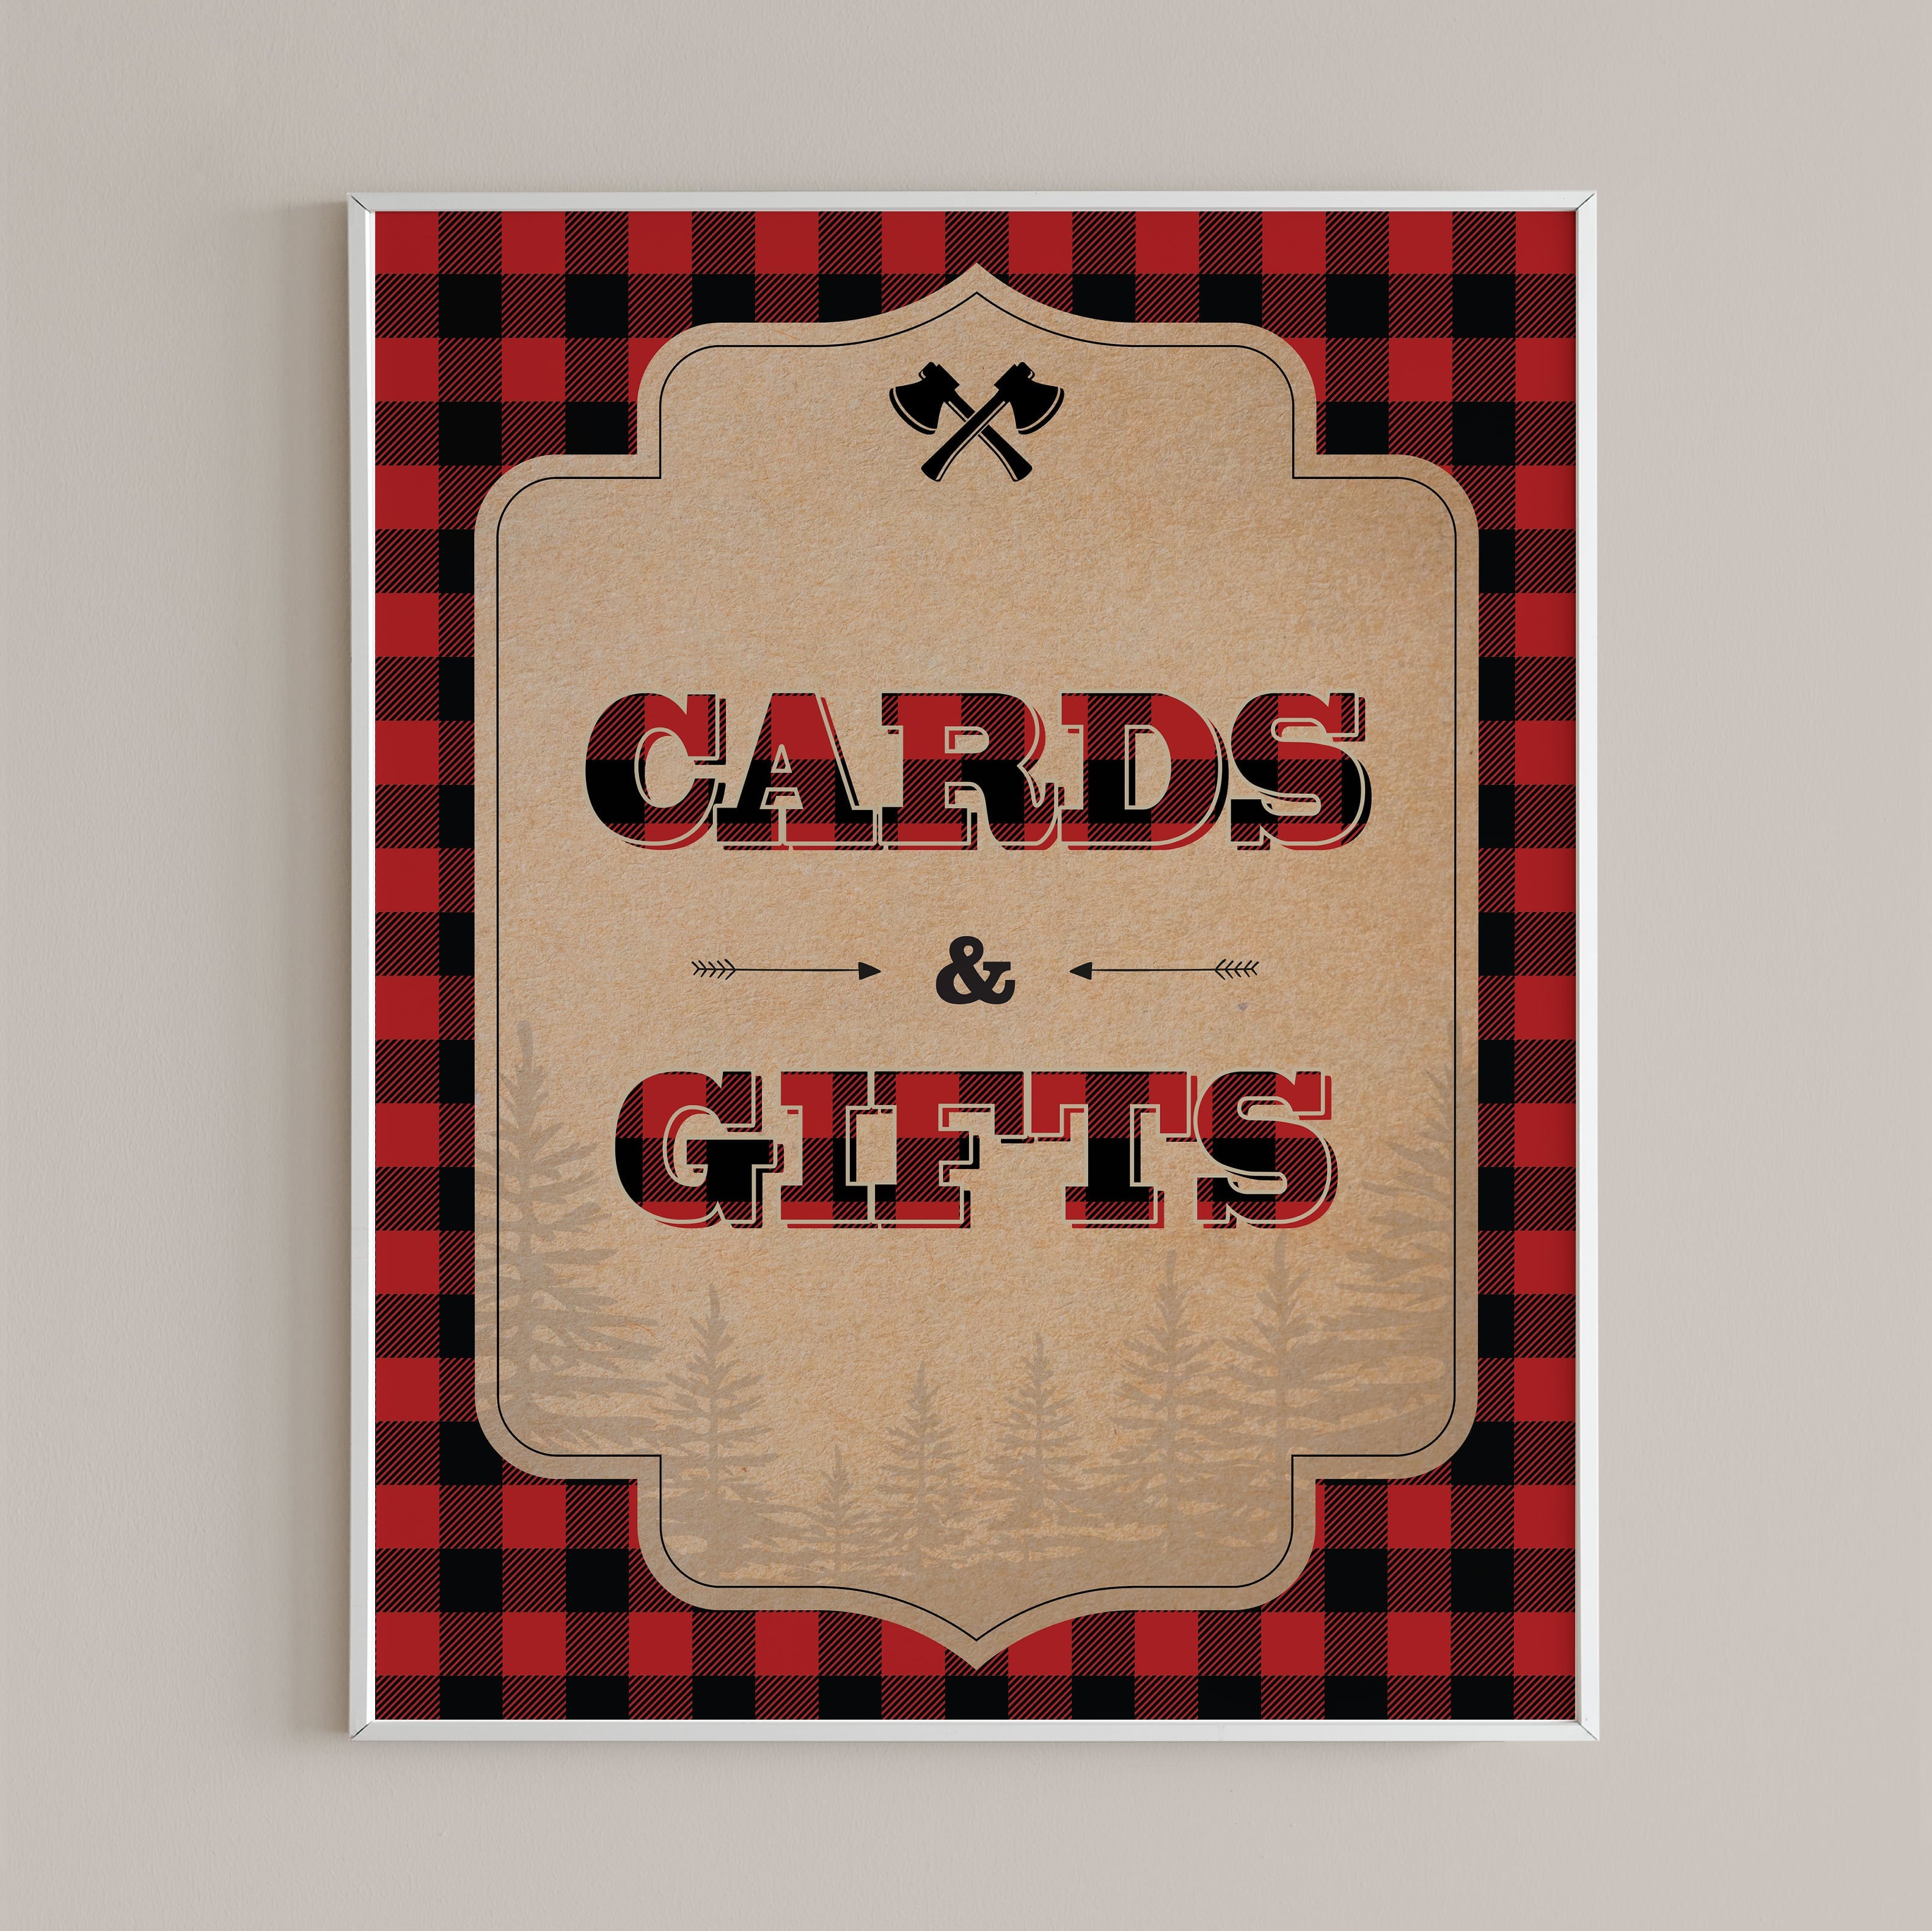 Cards & gifts table sign printable rustic by LittleSizzle